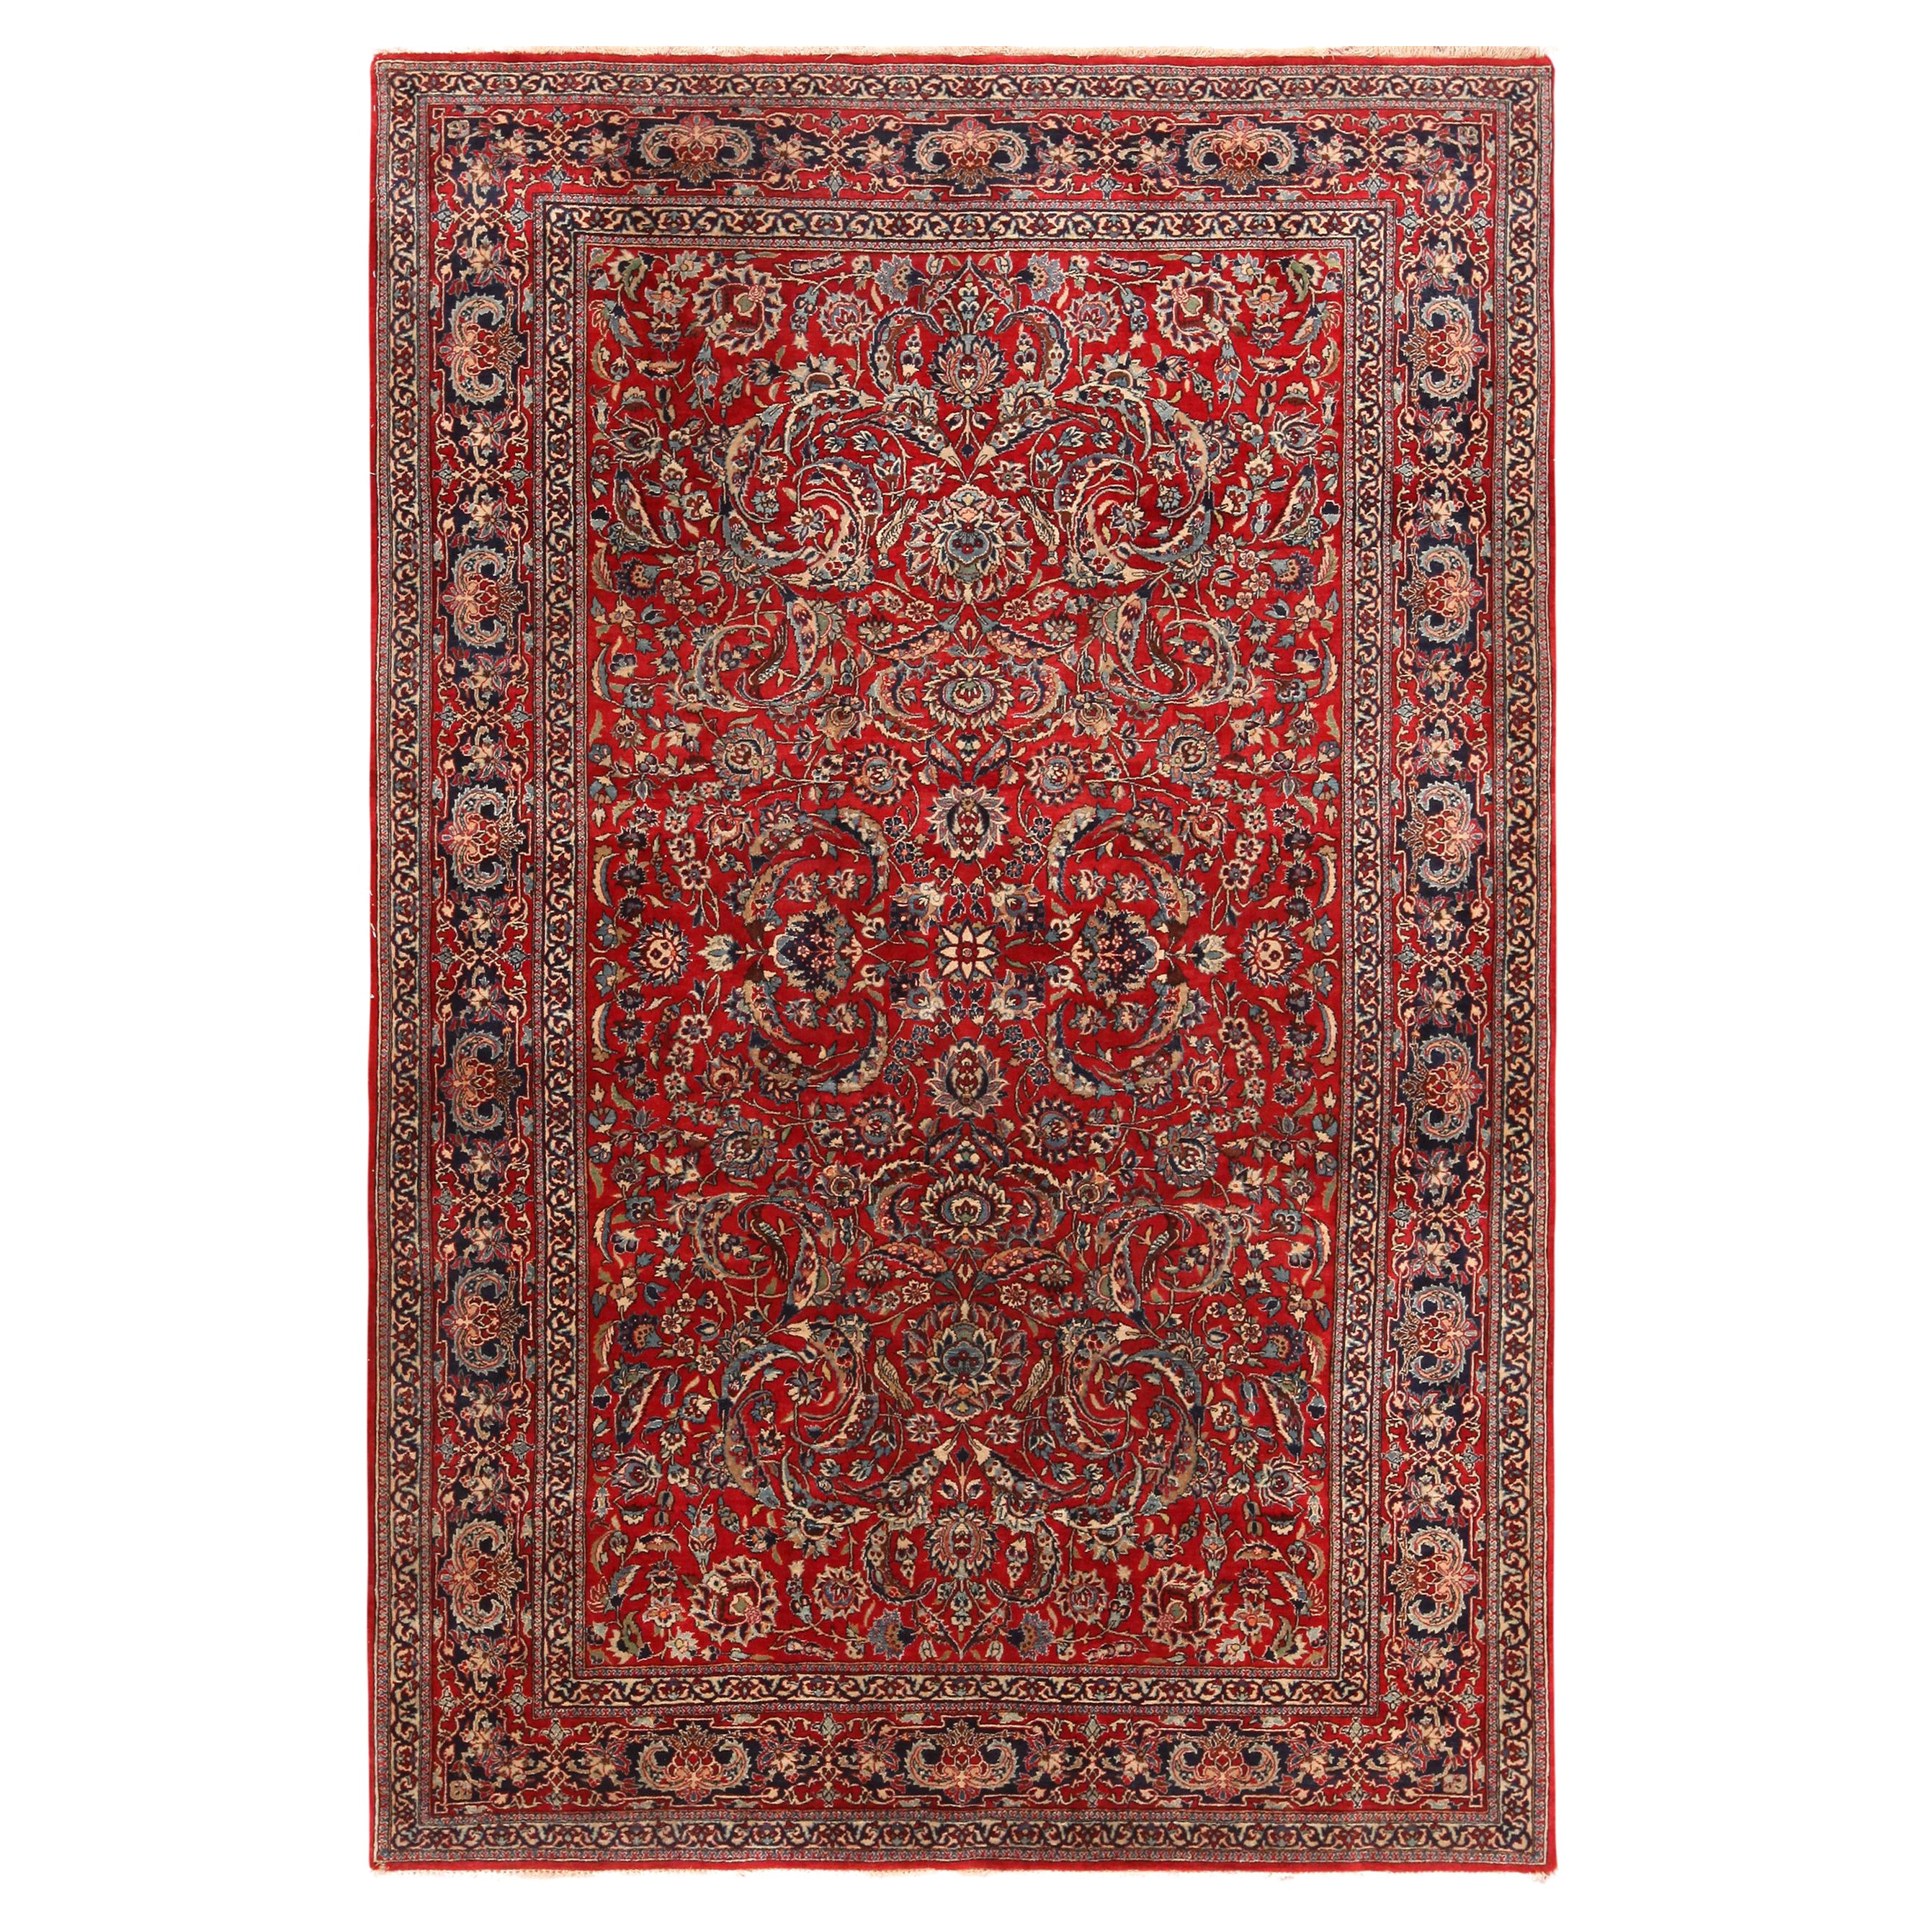 Antique Persian Isfahan Rug. 4 ft 9 in x 7 ft 2 in